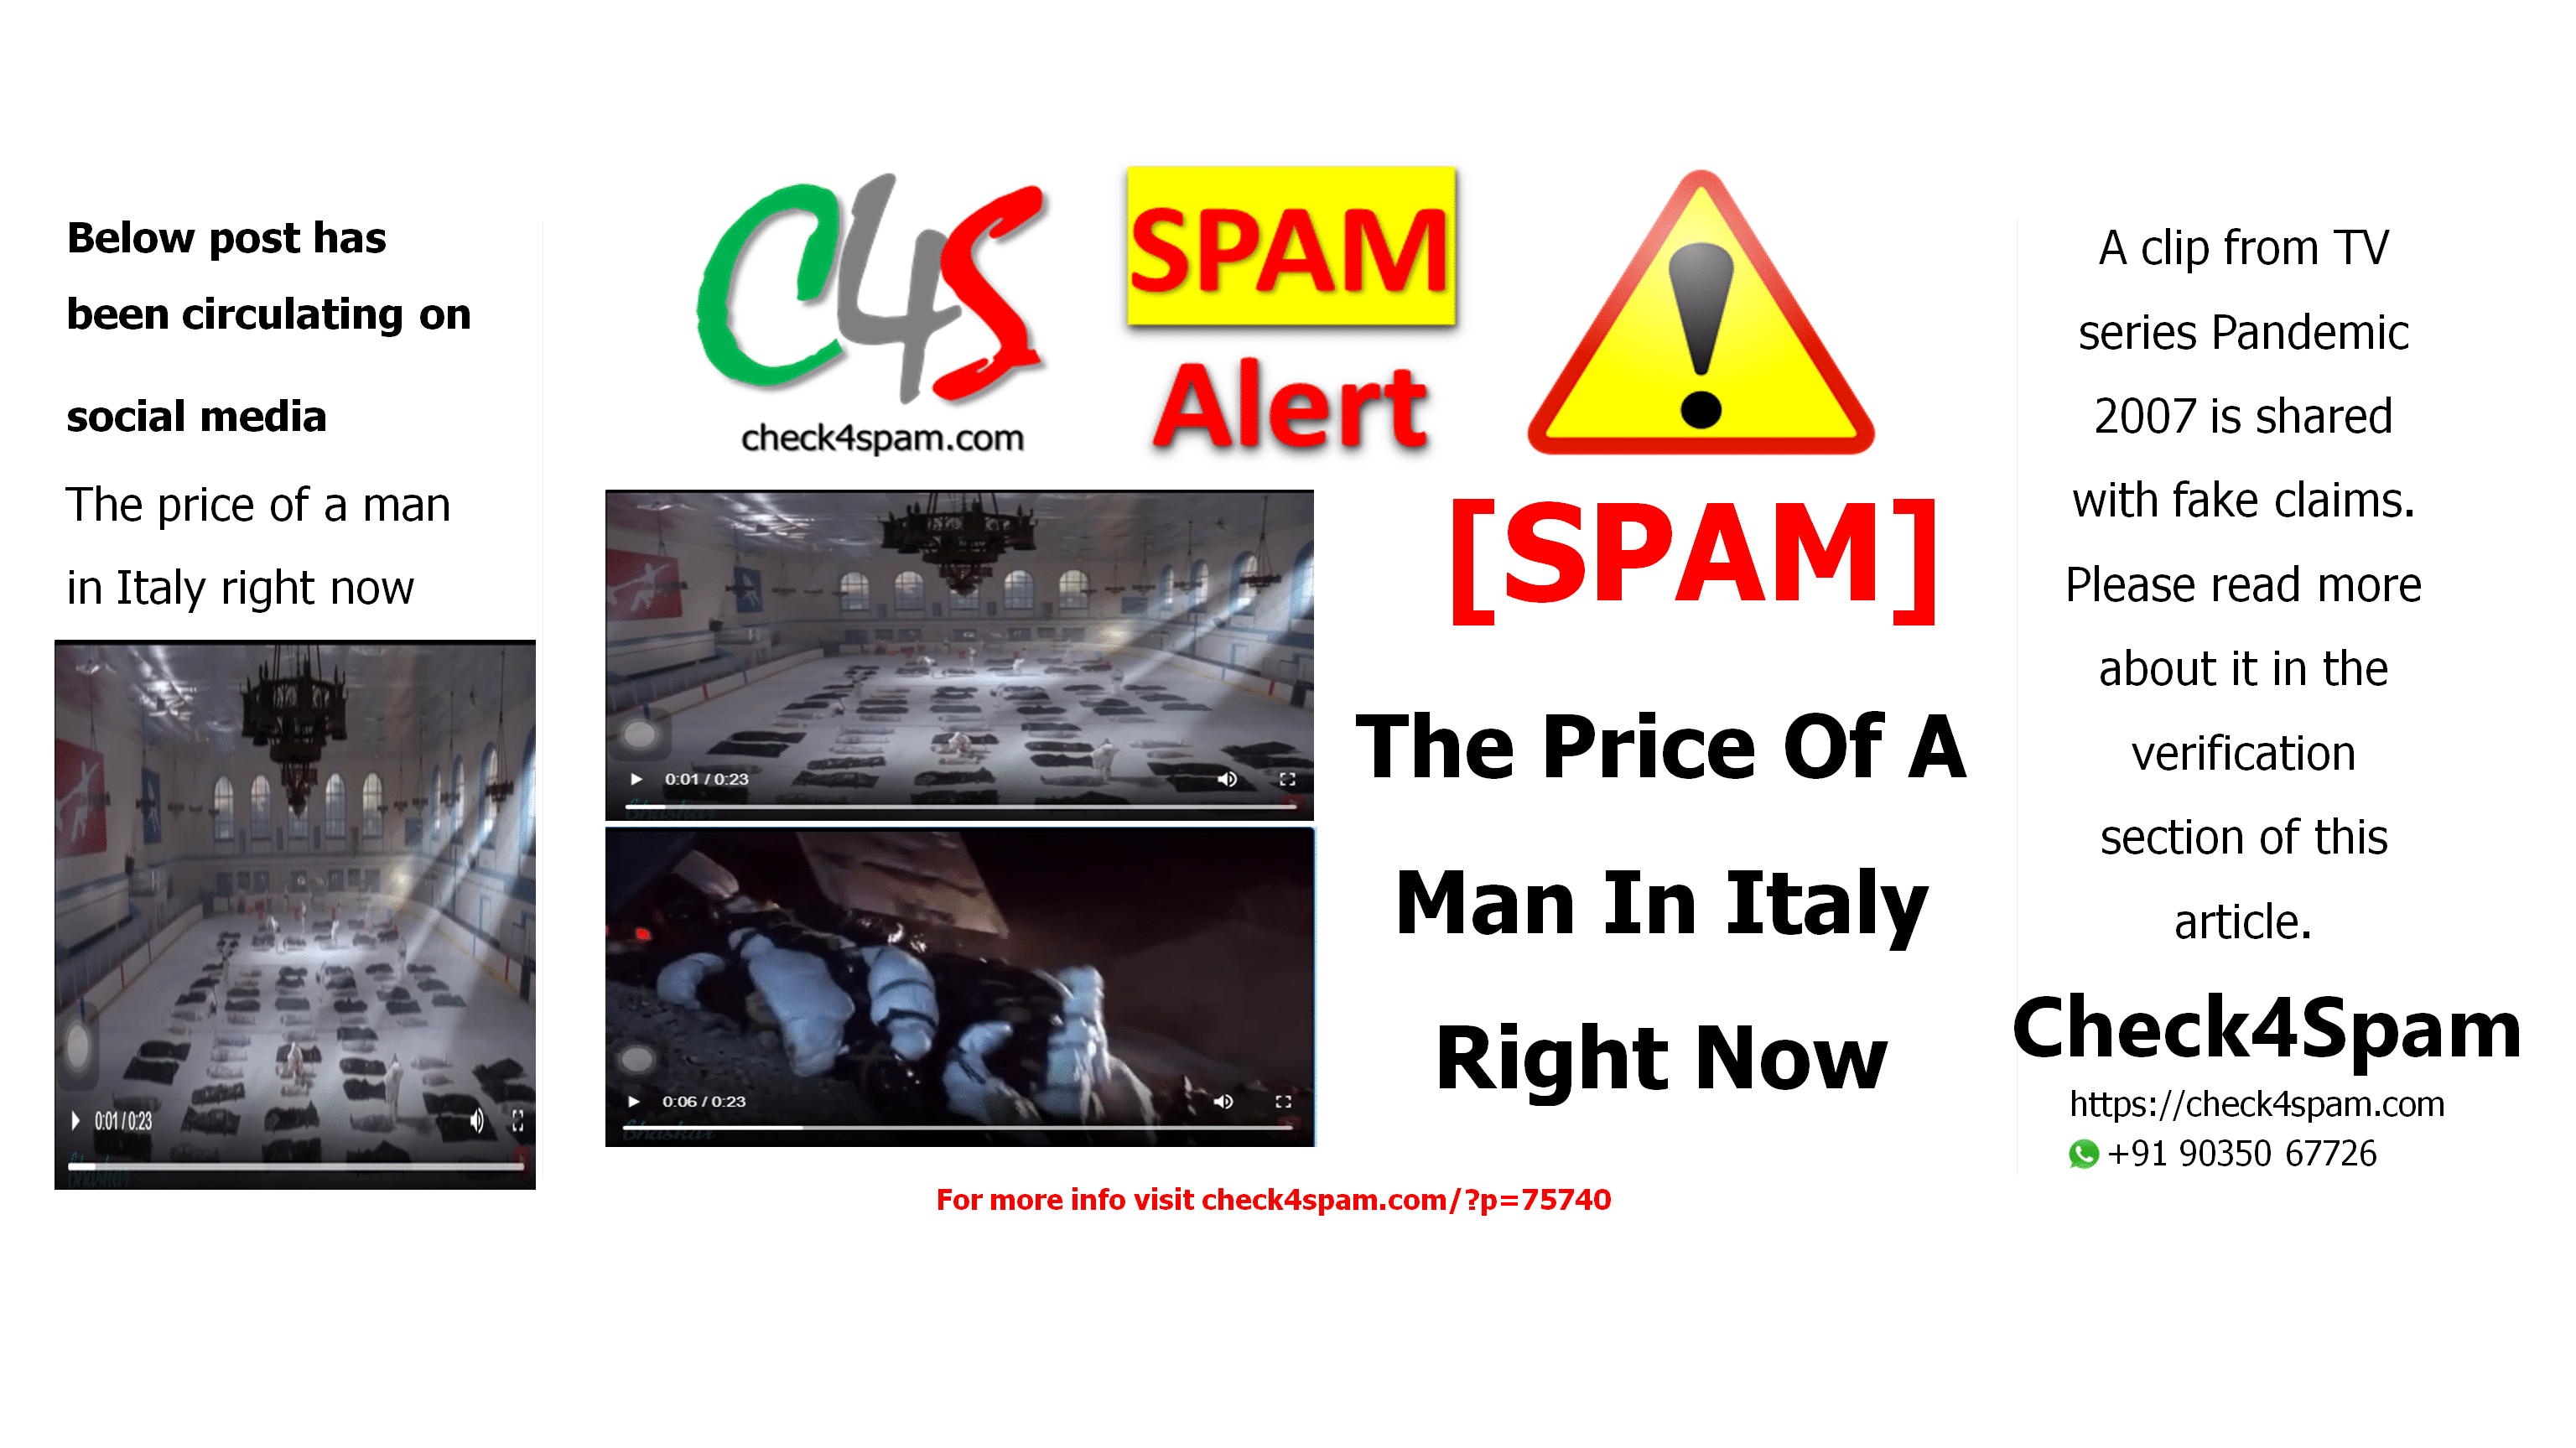 The Price Of A Man In Italy Right Now